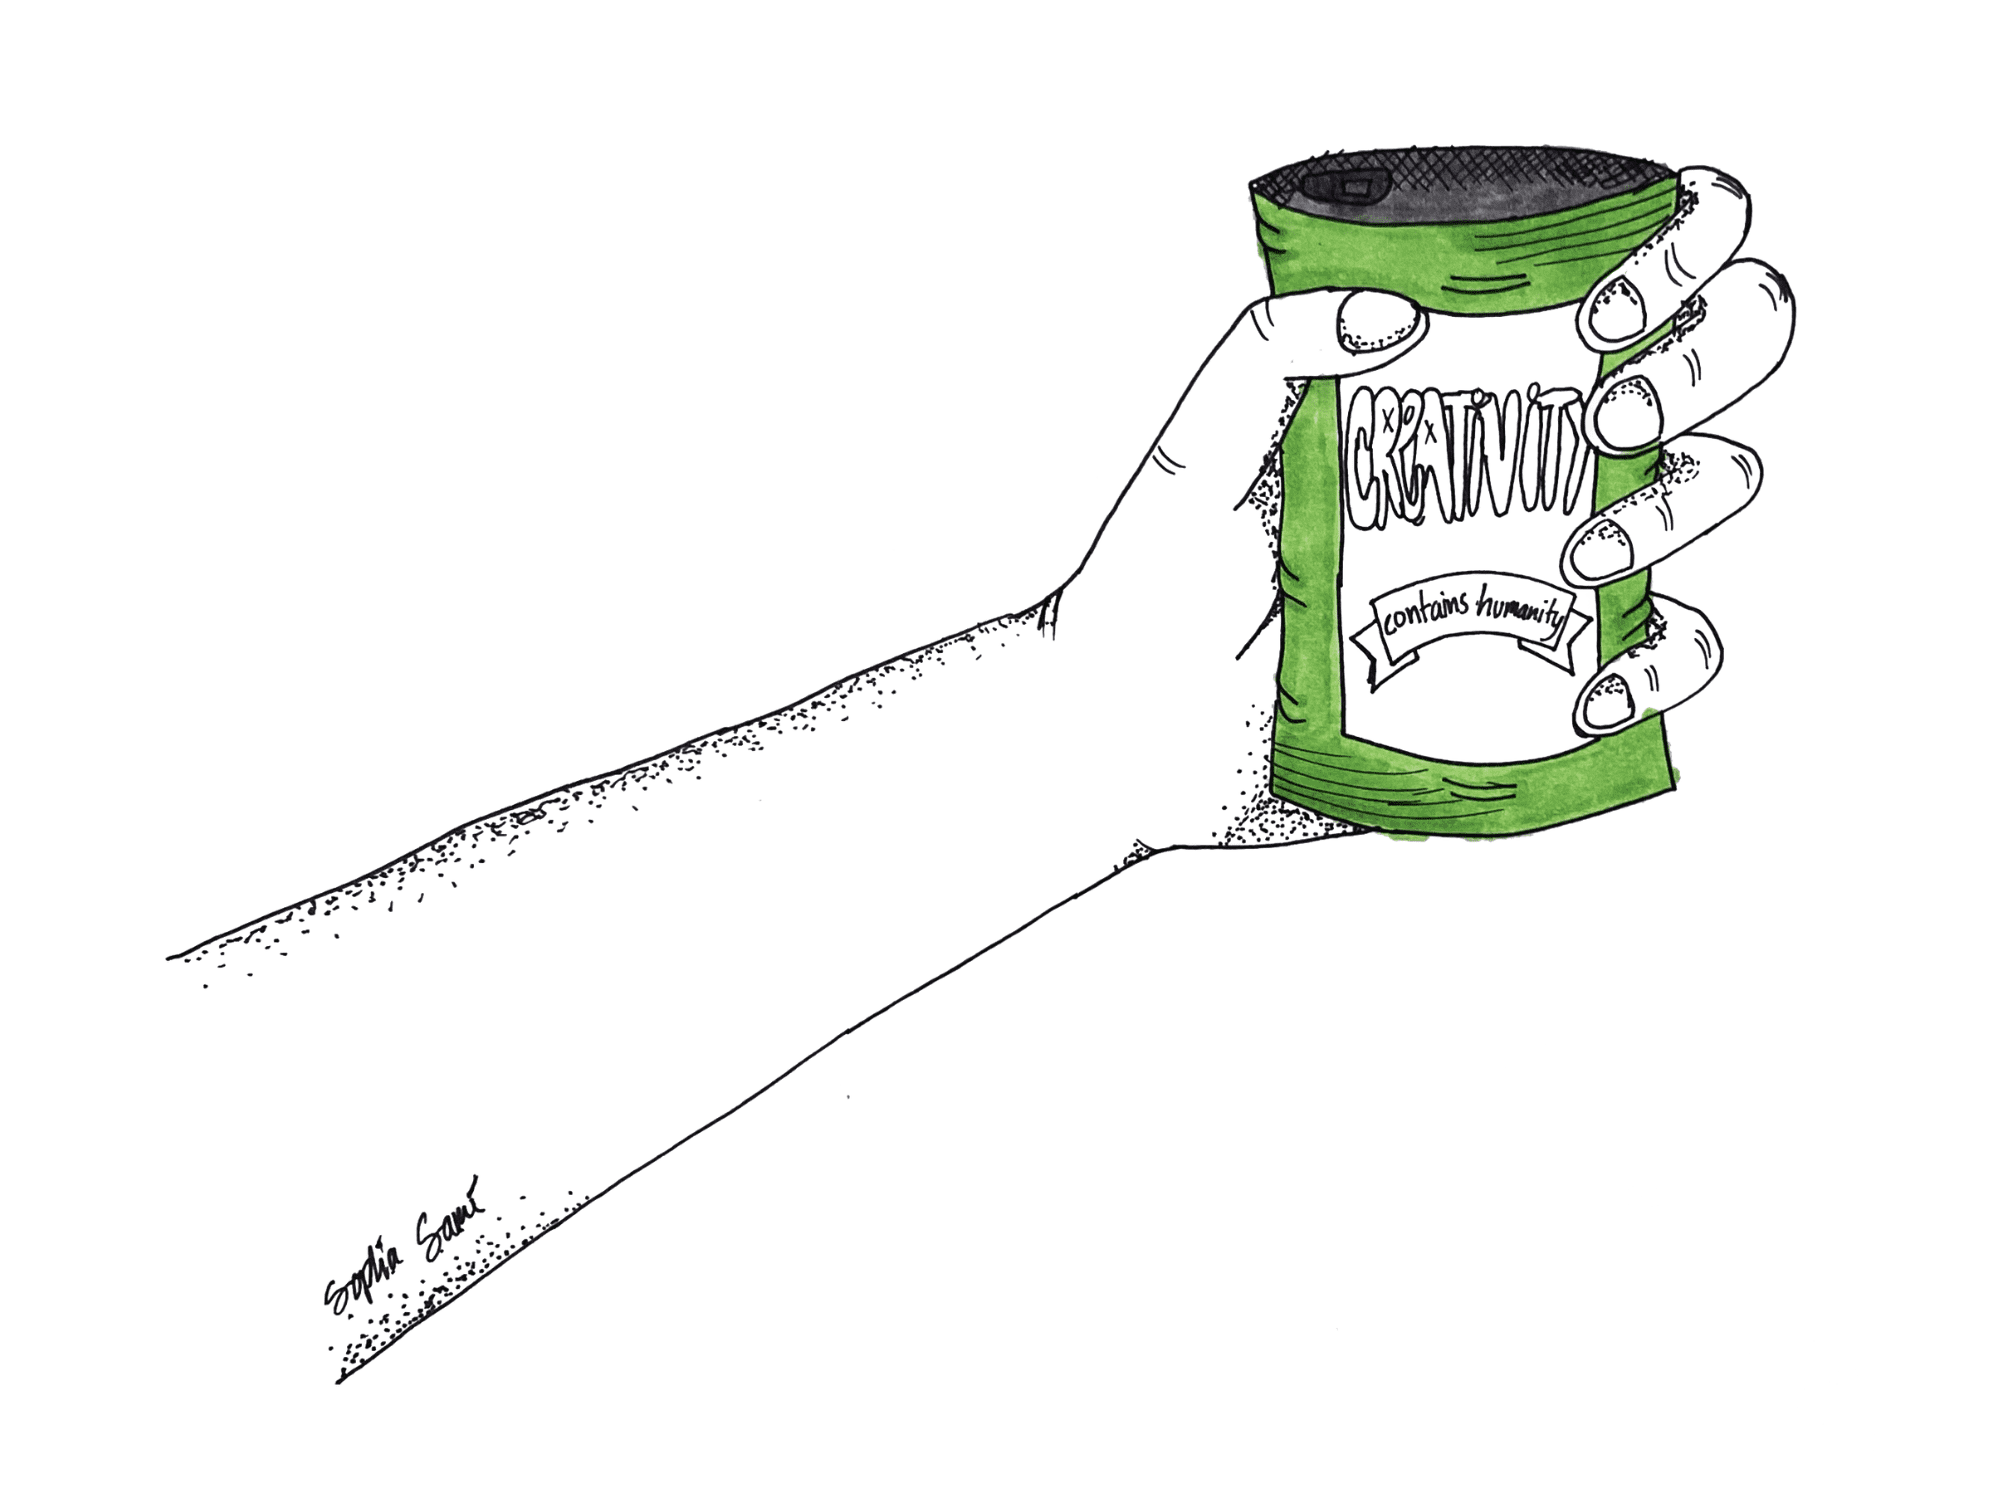 Drawing by Sophia Sami that shows a hand carrying a can for Contains Humanity